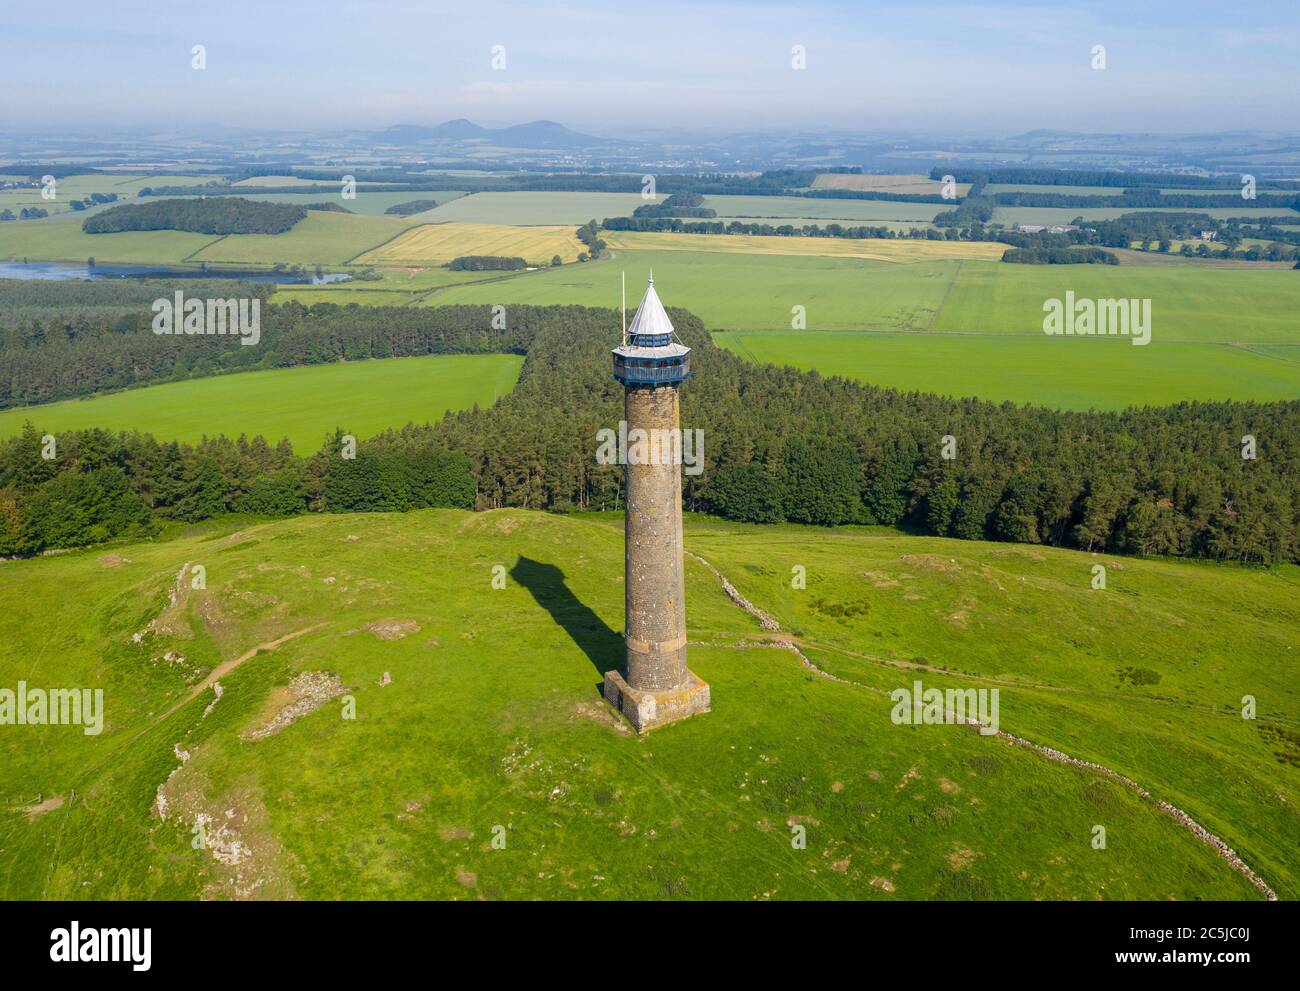 The Waterloo monument Peniel Heugh in the Scottish Borders is a 150-foot tower, built between 1817 and 1824 to commemorate the Battle of Waterloo. Stock Photo